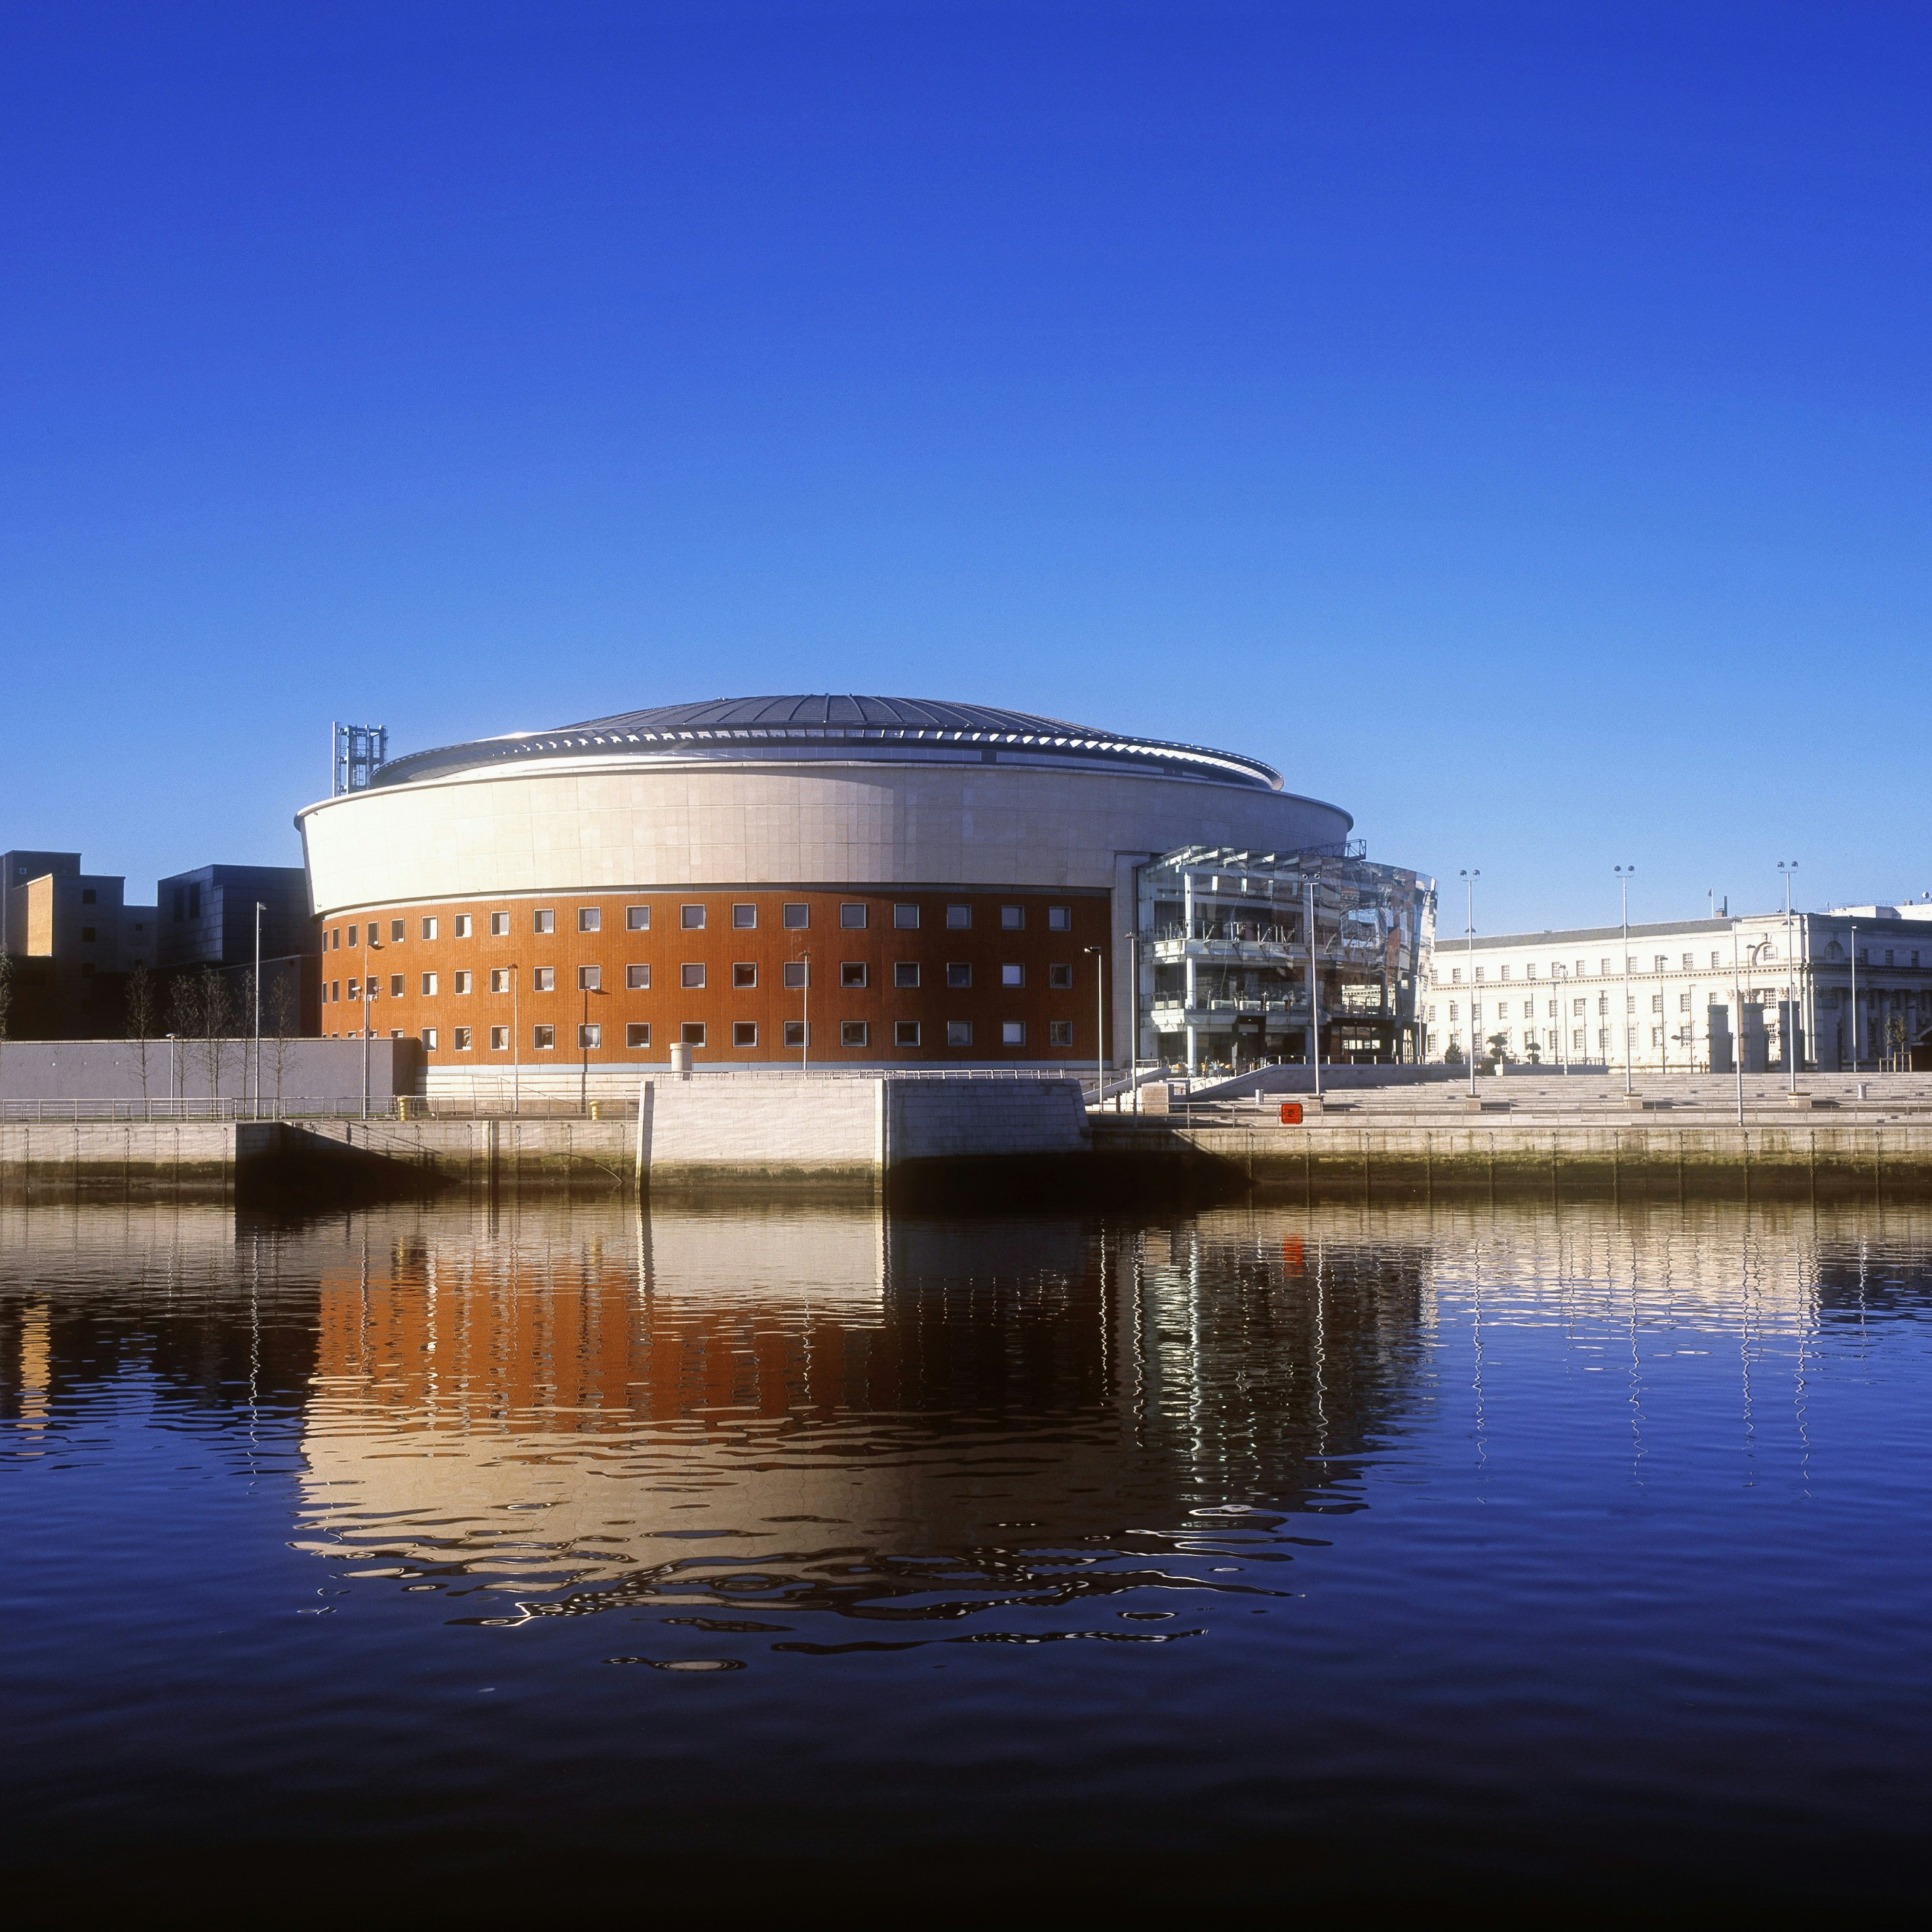 Waterfront Hall was completed in 1997 and was designed by the architecture firm of Robinson McIlwaine.